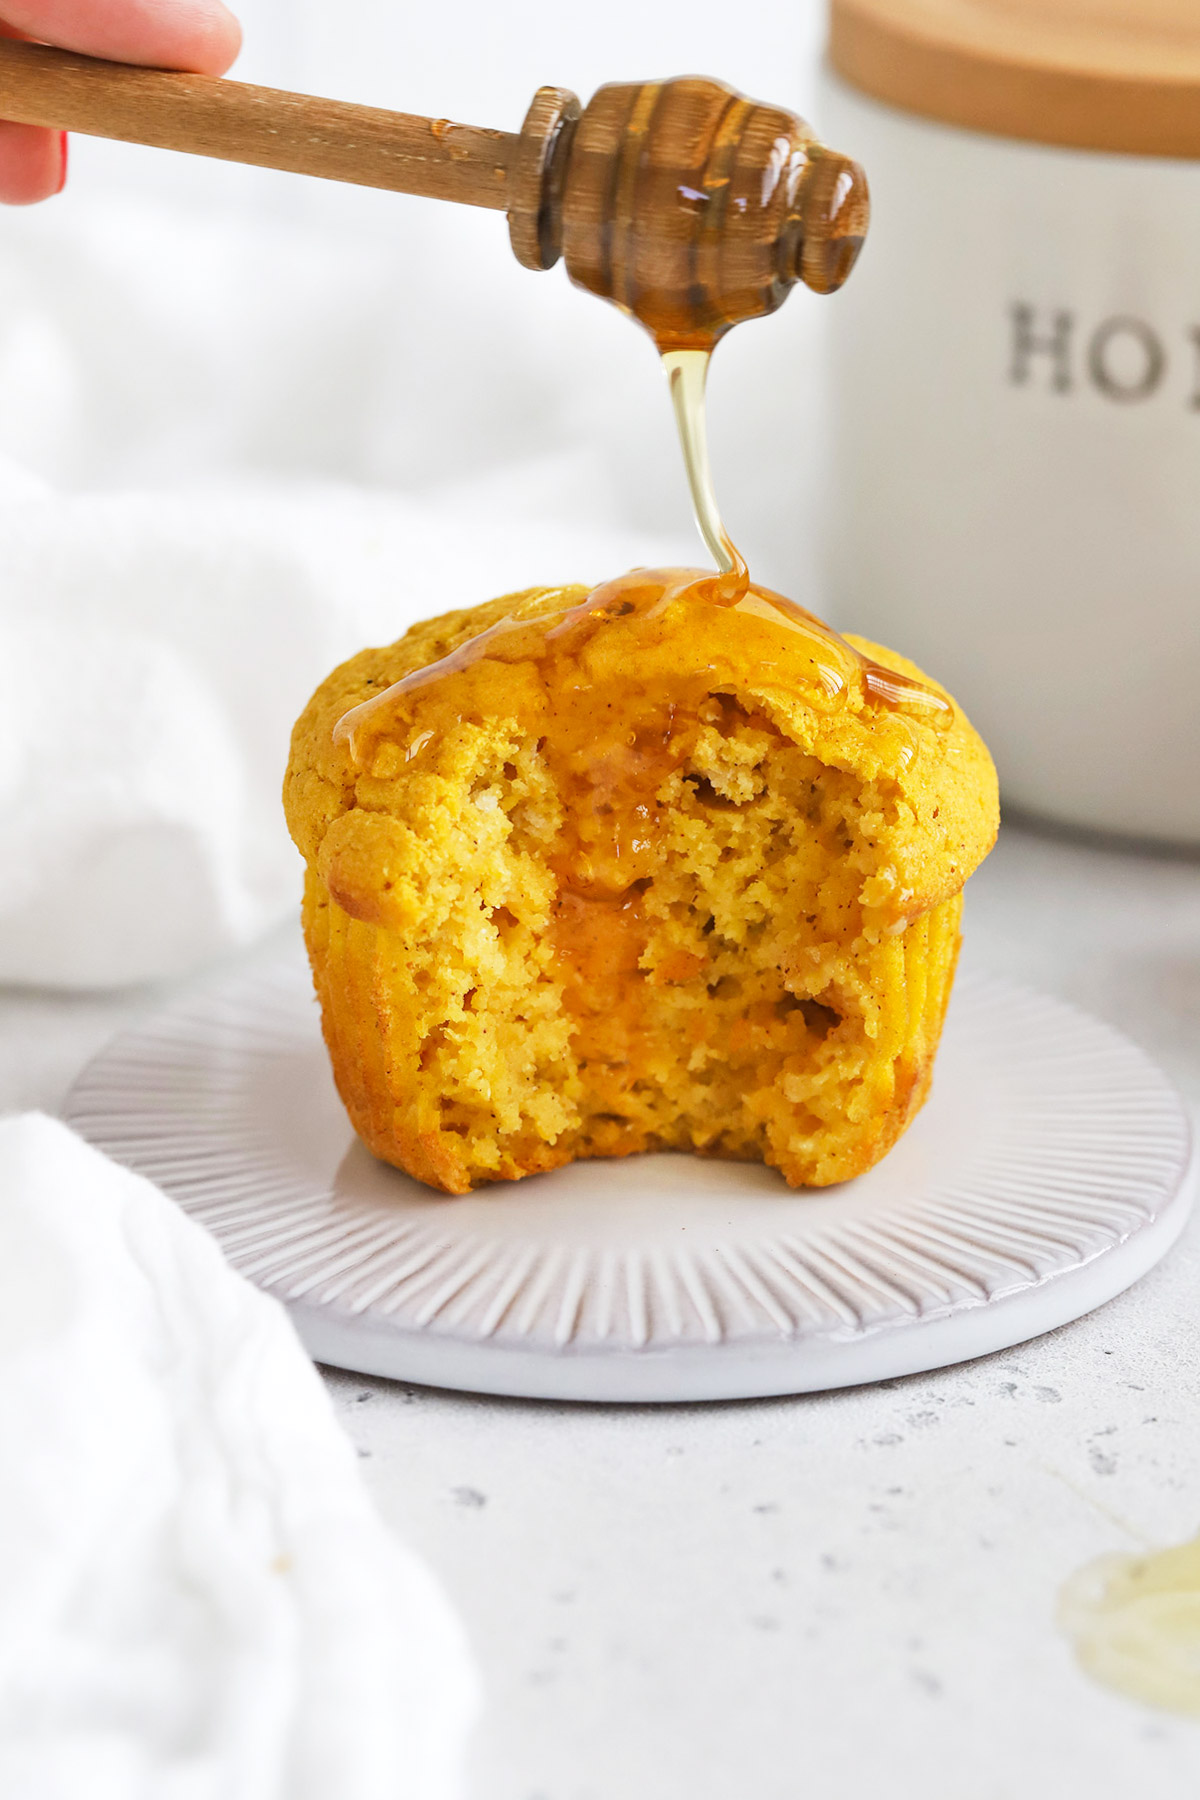 Front view of a gluten-free pumpkin muffin with a bite out of it, being drizzled with honey